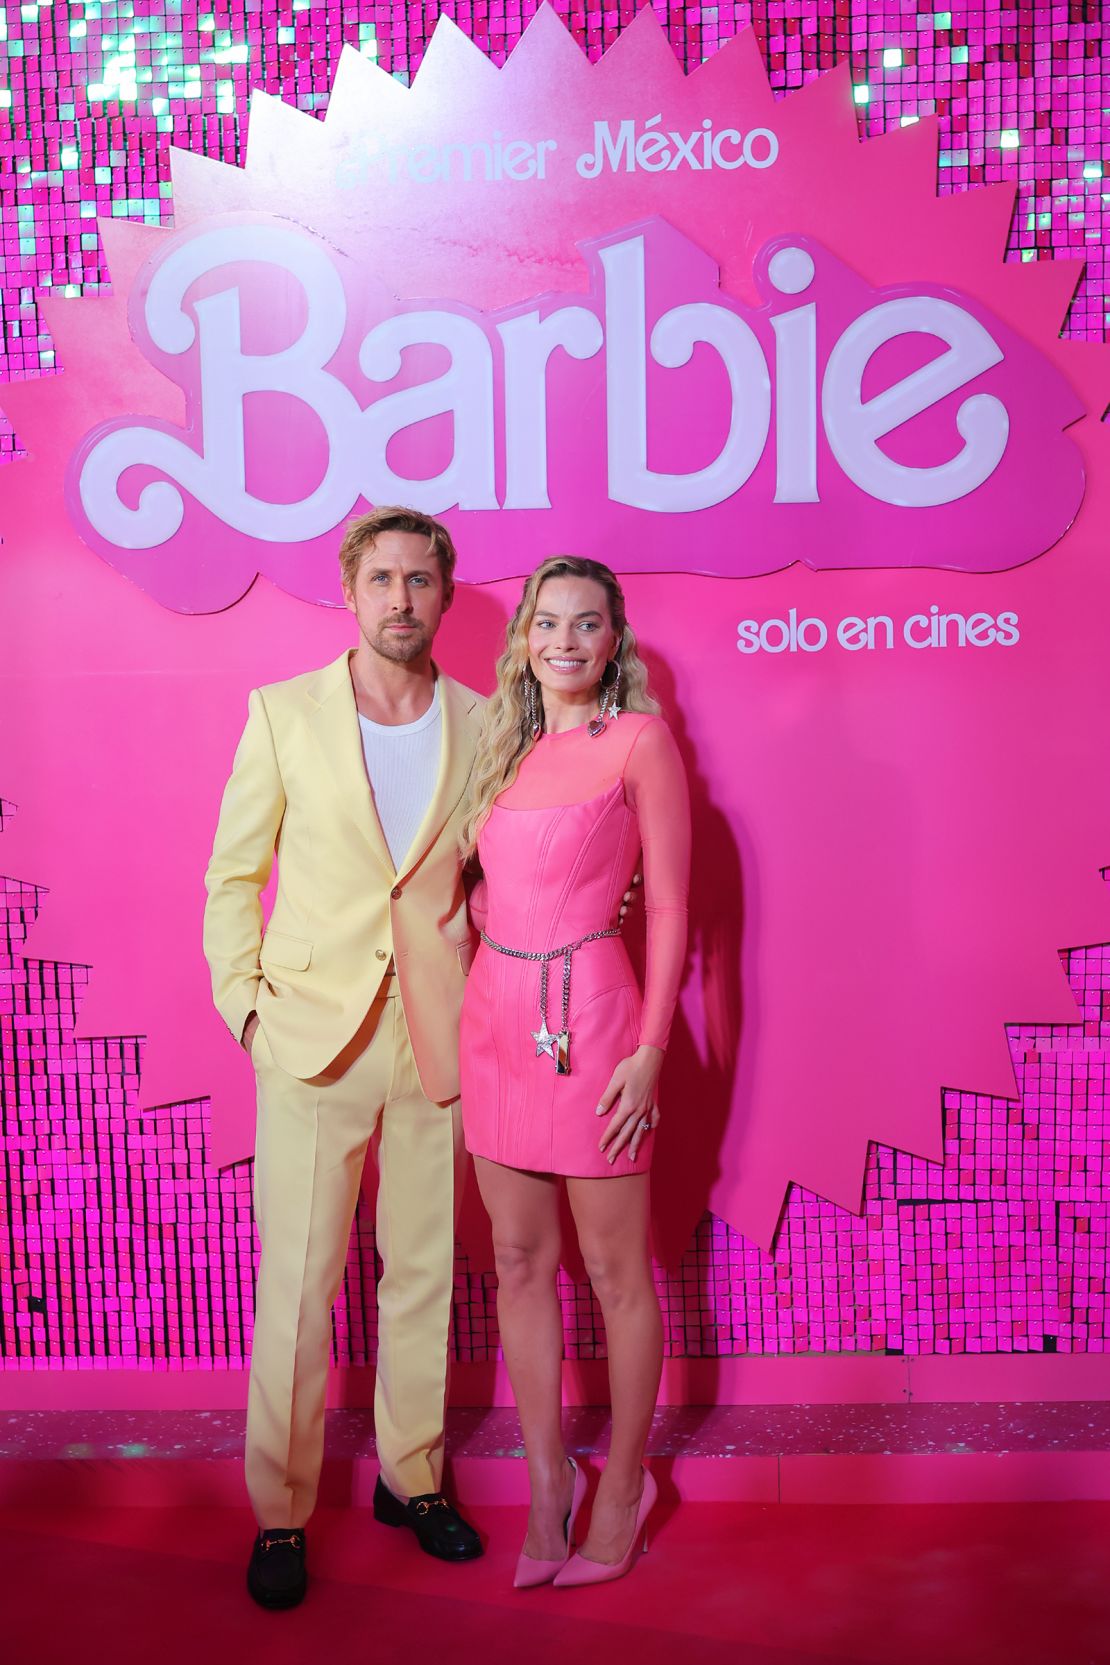 NAUCALPAN DE JUAREZ, MEXICO - JULY 06: Ryan Gosling and Margot Robbie pose during the pink carpet for 'Barbie' at Plaza Parque Toreo on July 06, 2023 in Naucalpan de Juarez, Mexico. (Photo by Hector Vivas/Getty Images)